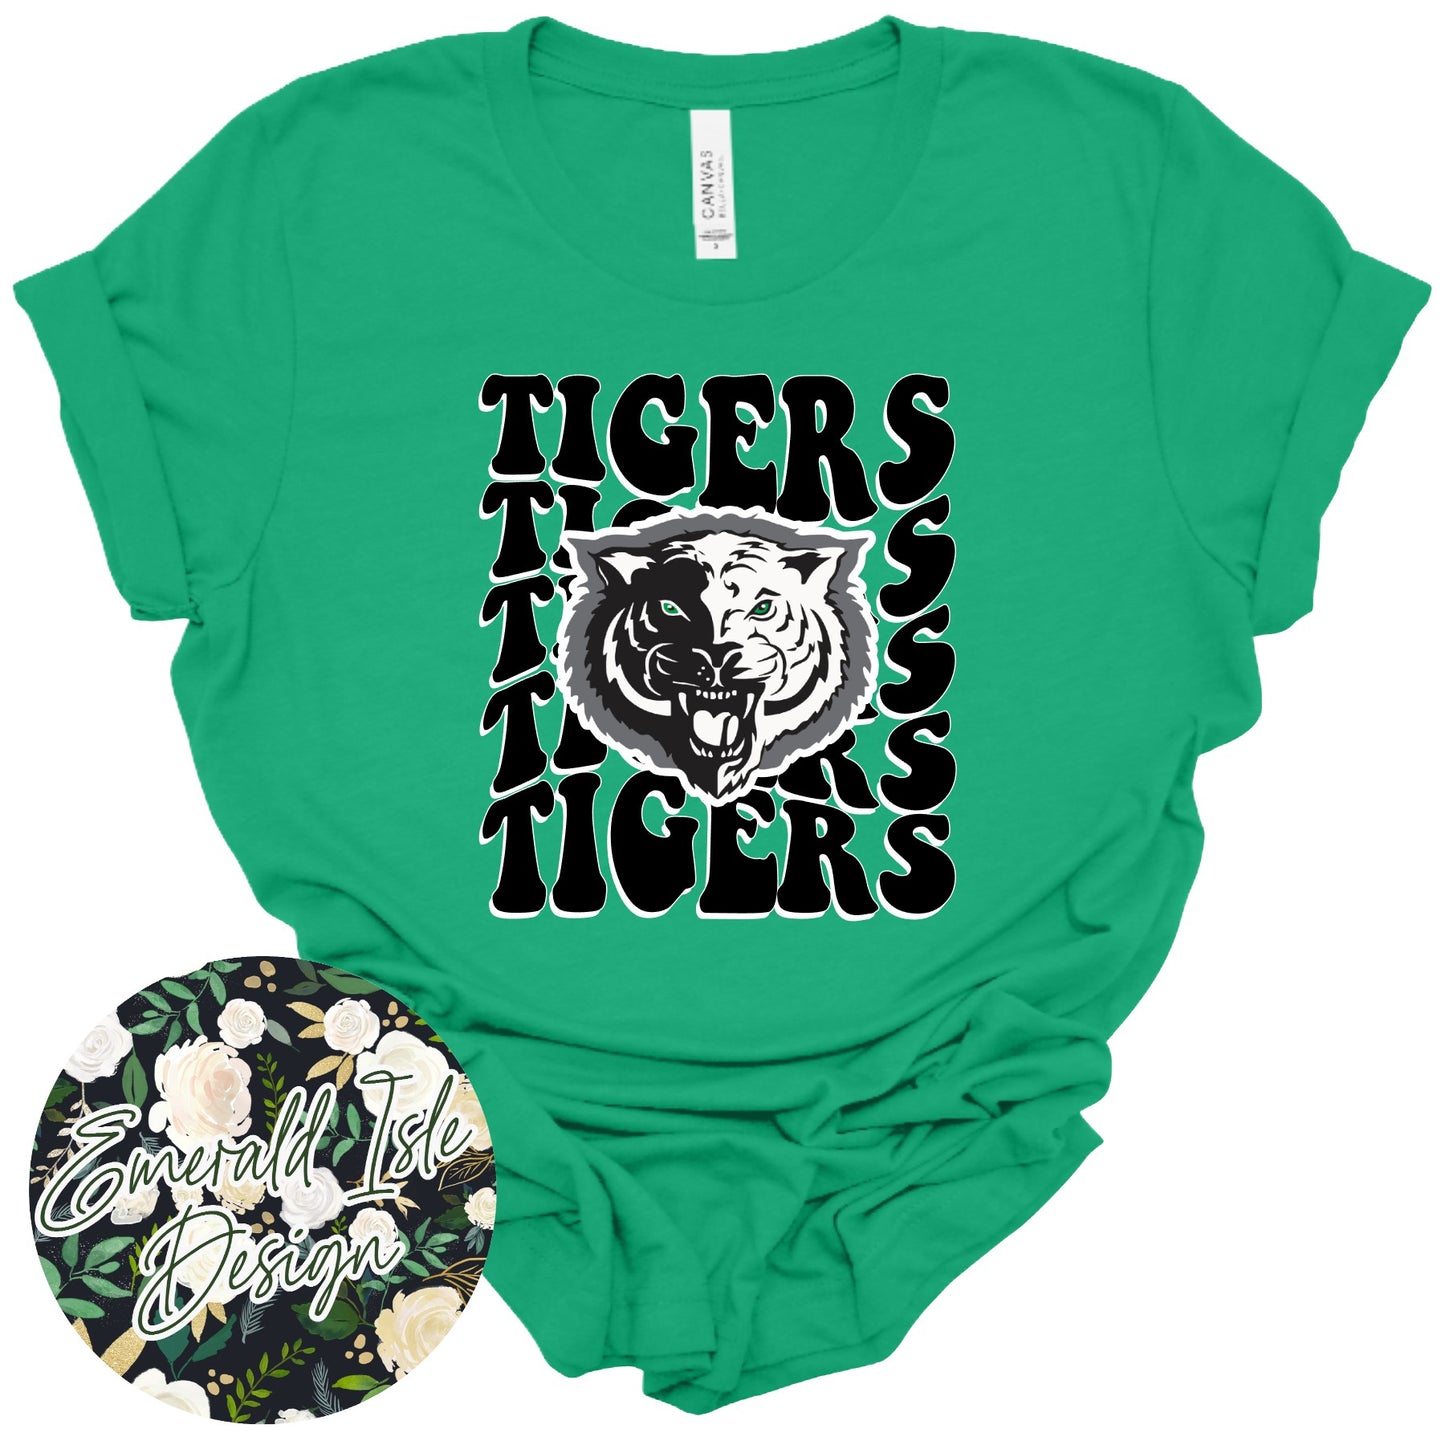 Tigers Groovy Repeat Design